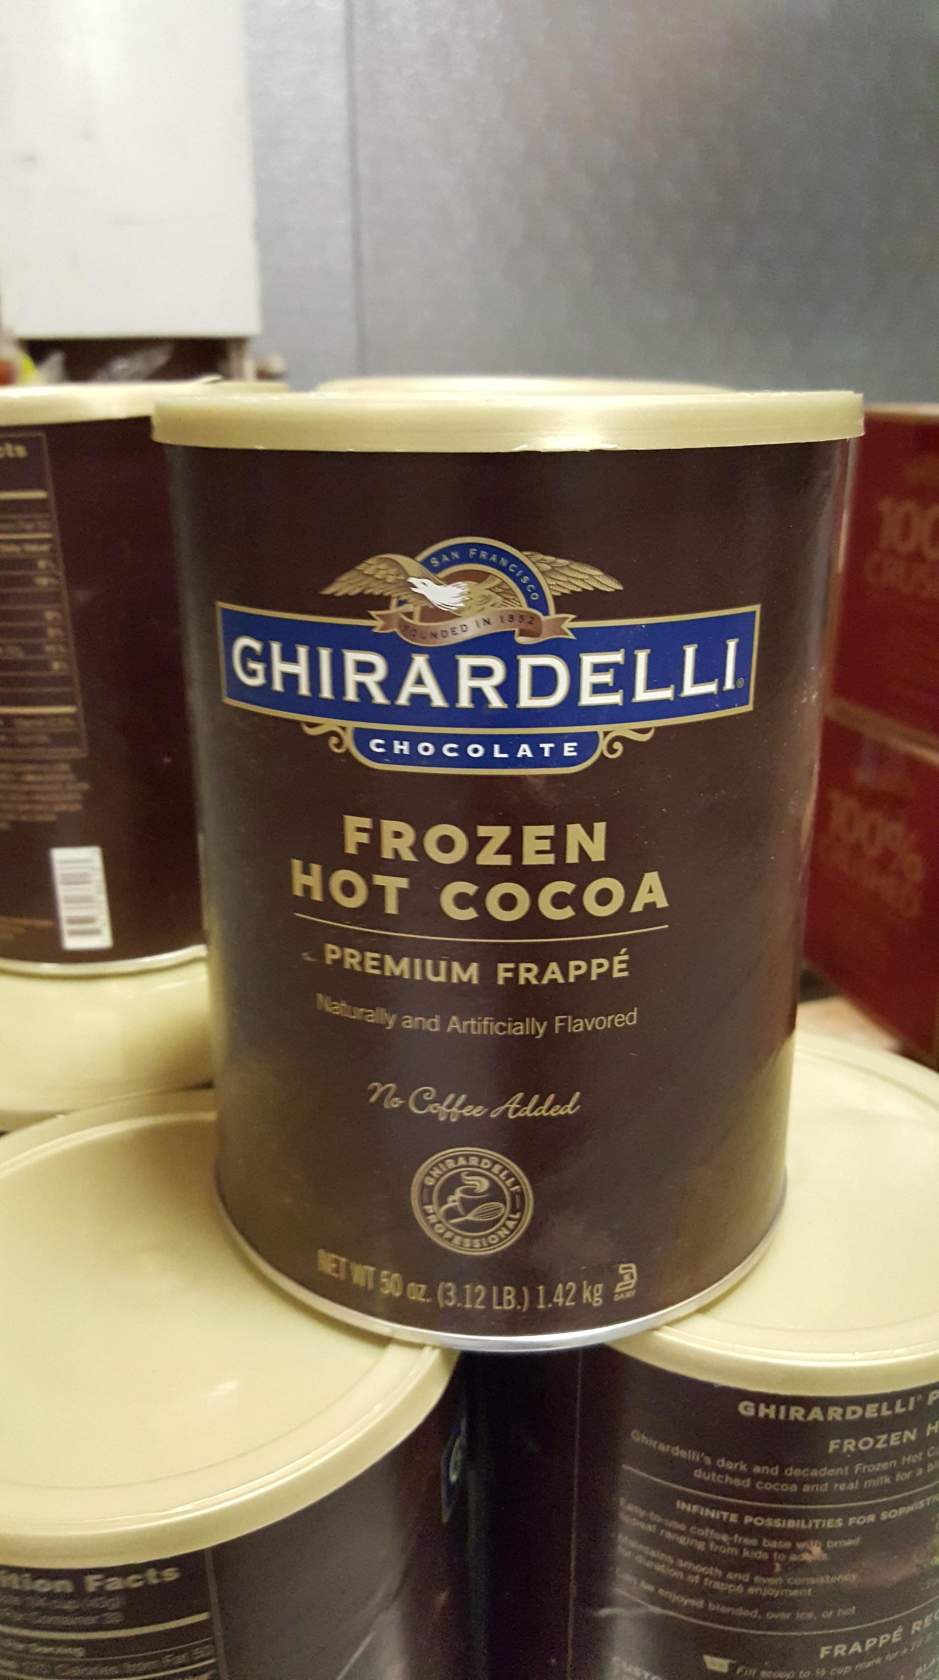 Ghirardelli Frozen Hot Cocoa FRP 6/3.12lb - Sold by EA